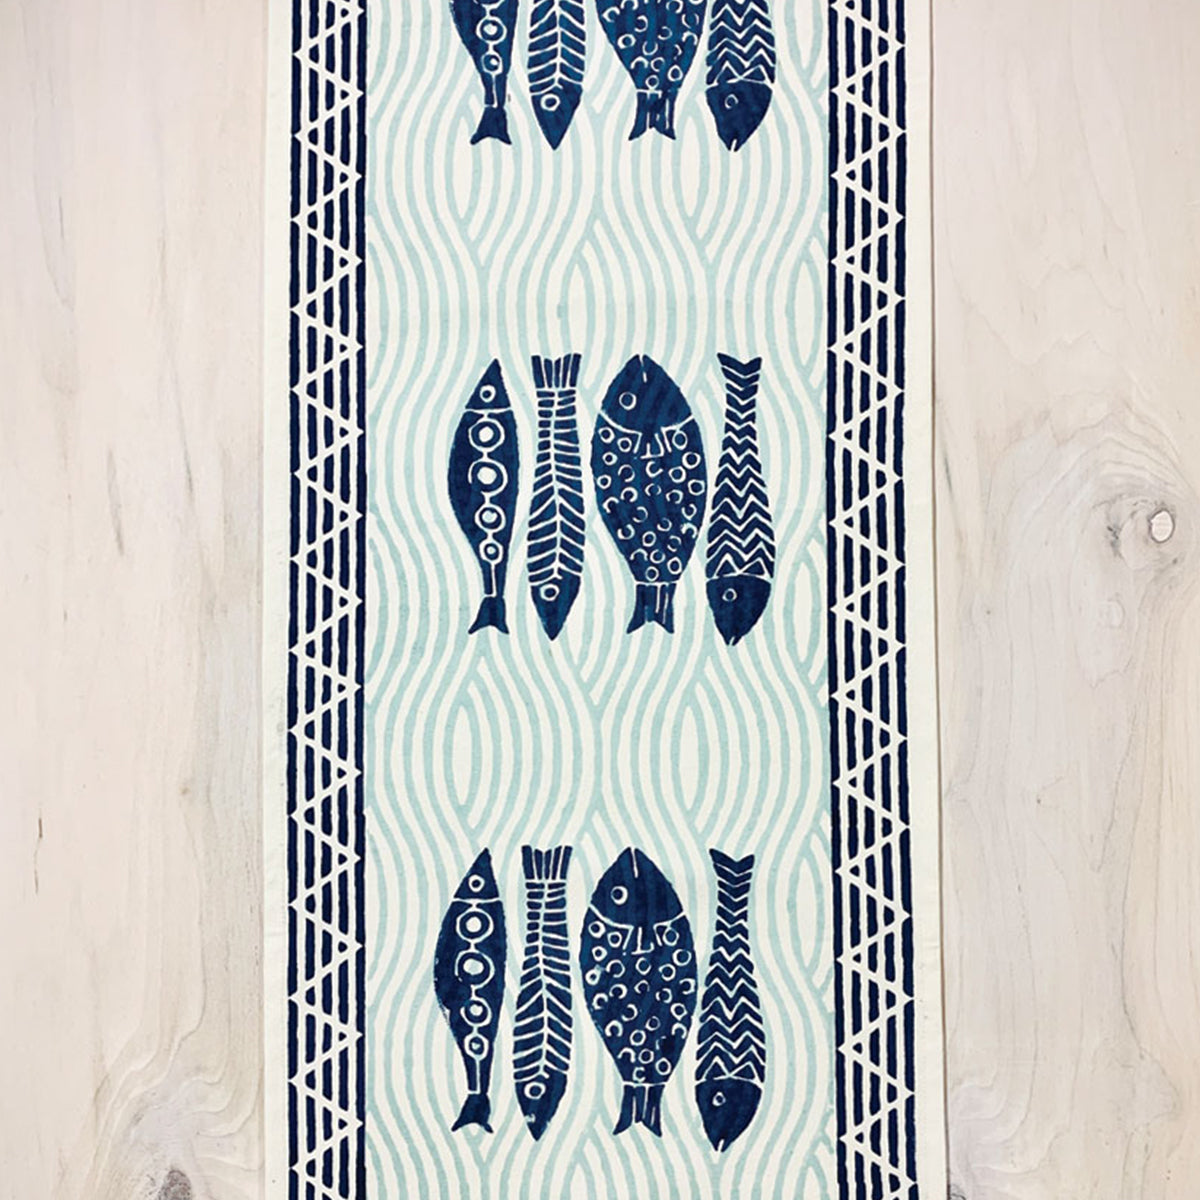 Fish Table Runner - Museum of New Mexico Foundation Shops